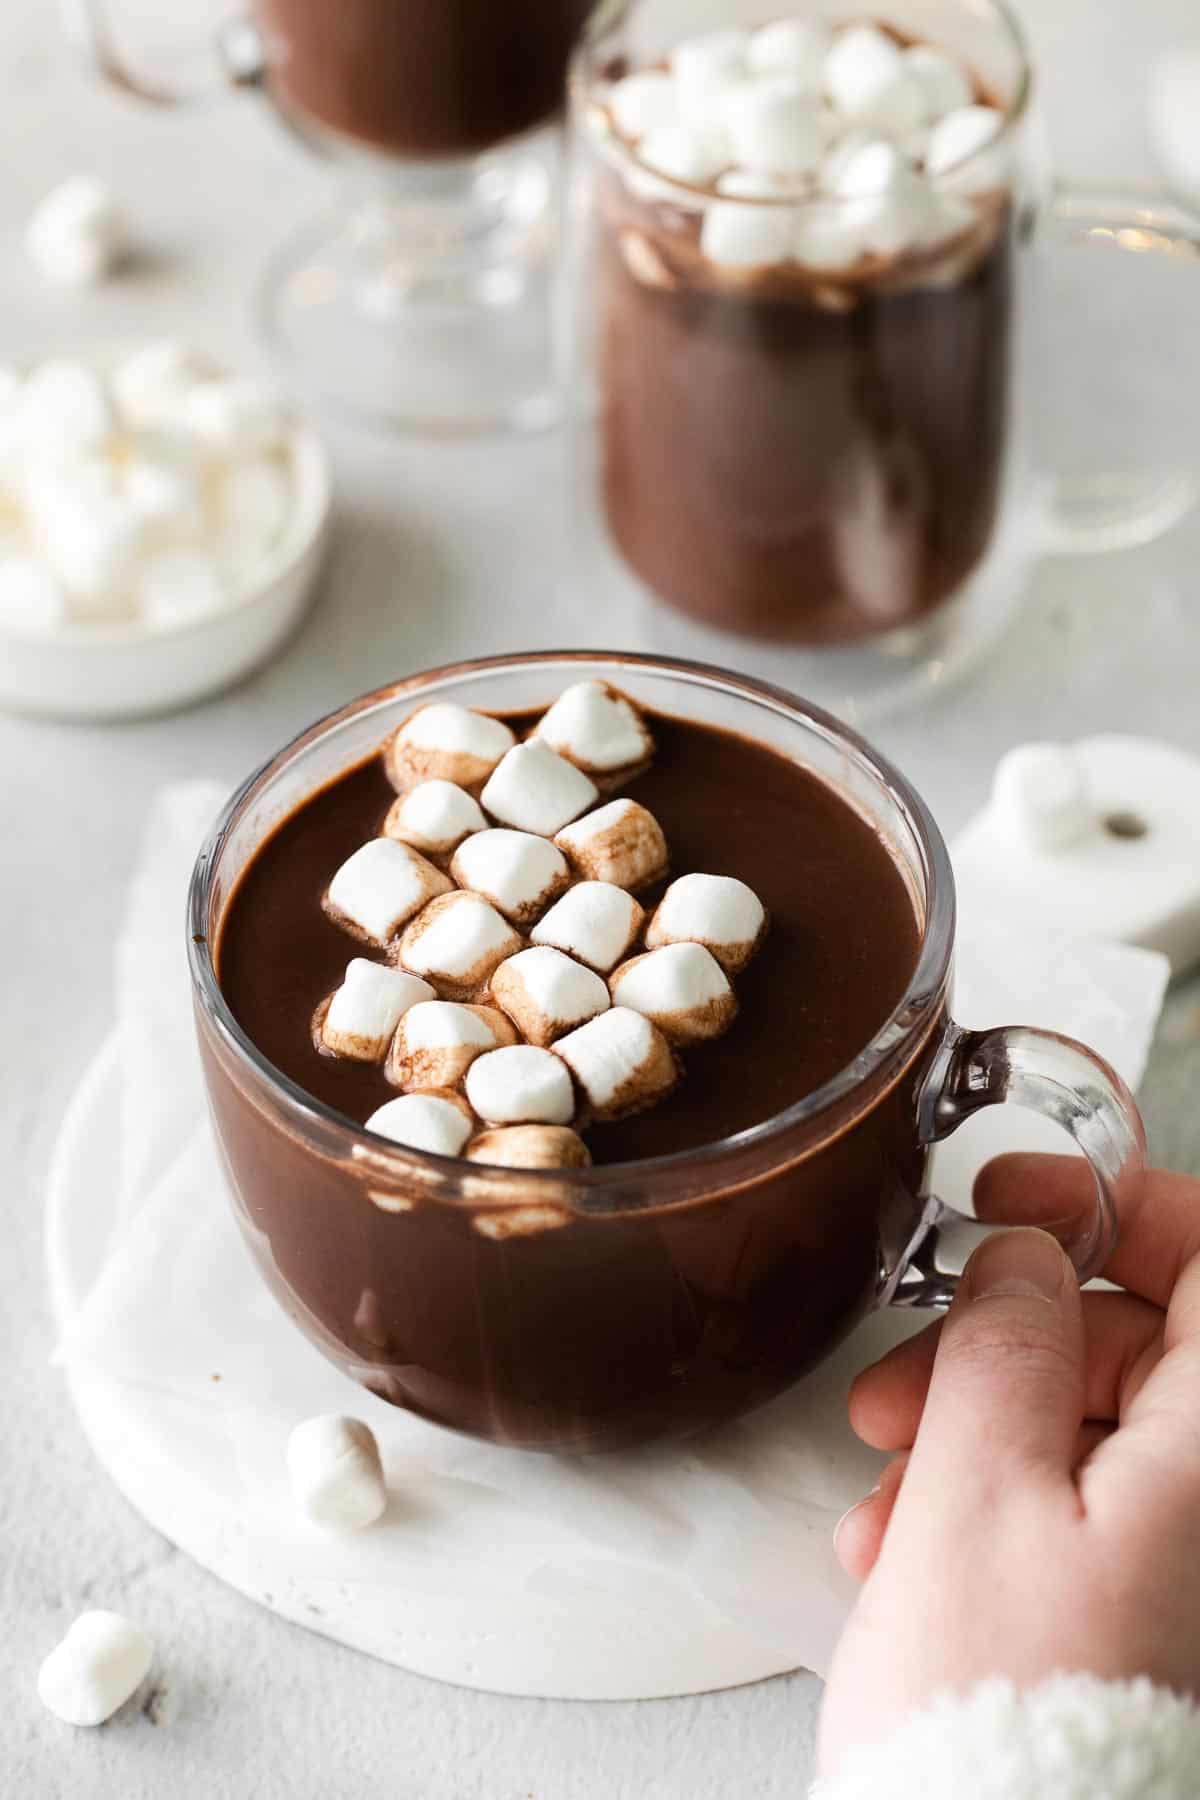 A hand holding a glass mug of hot chocolate with marshmallows on top